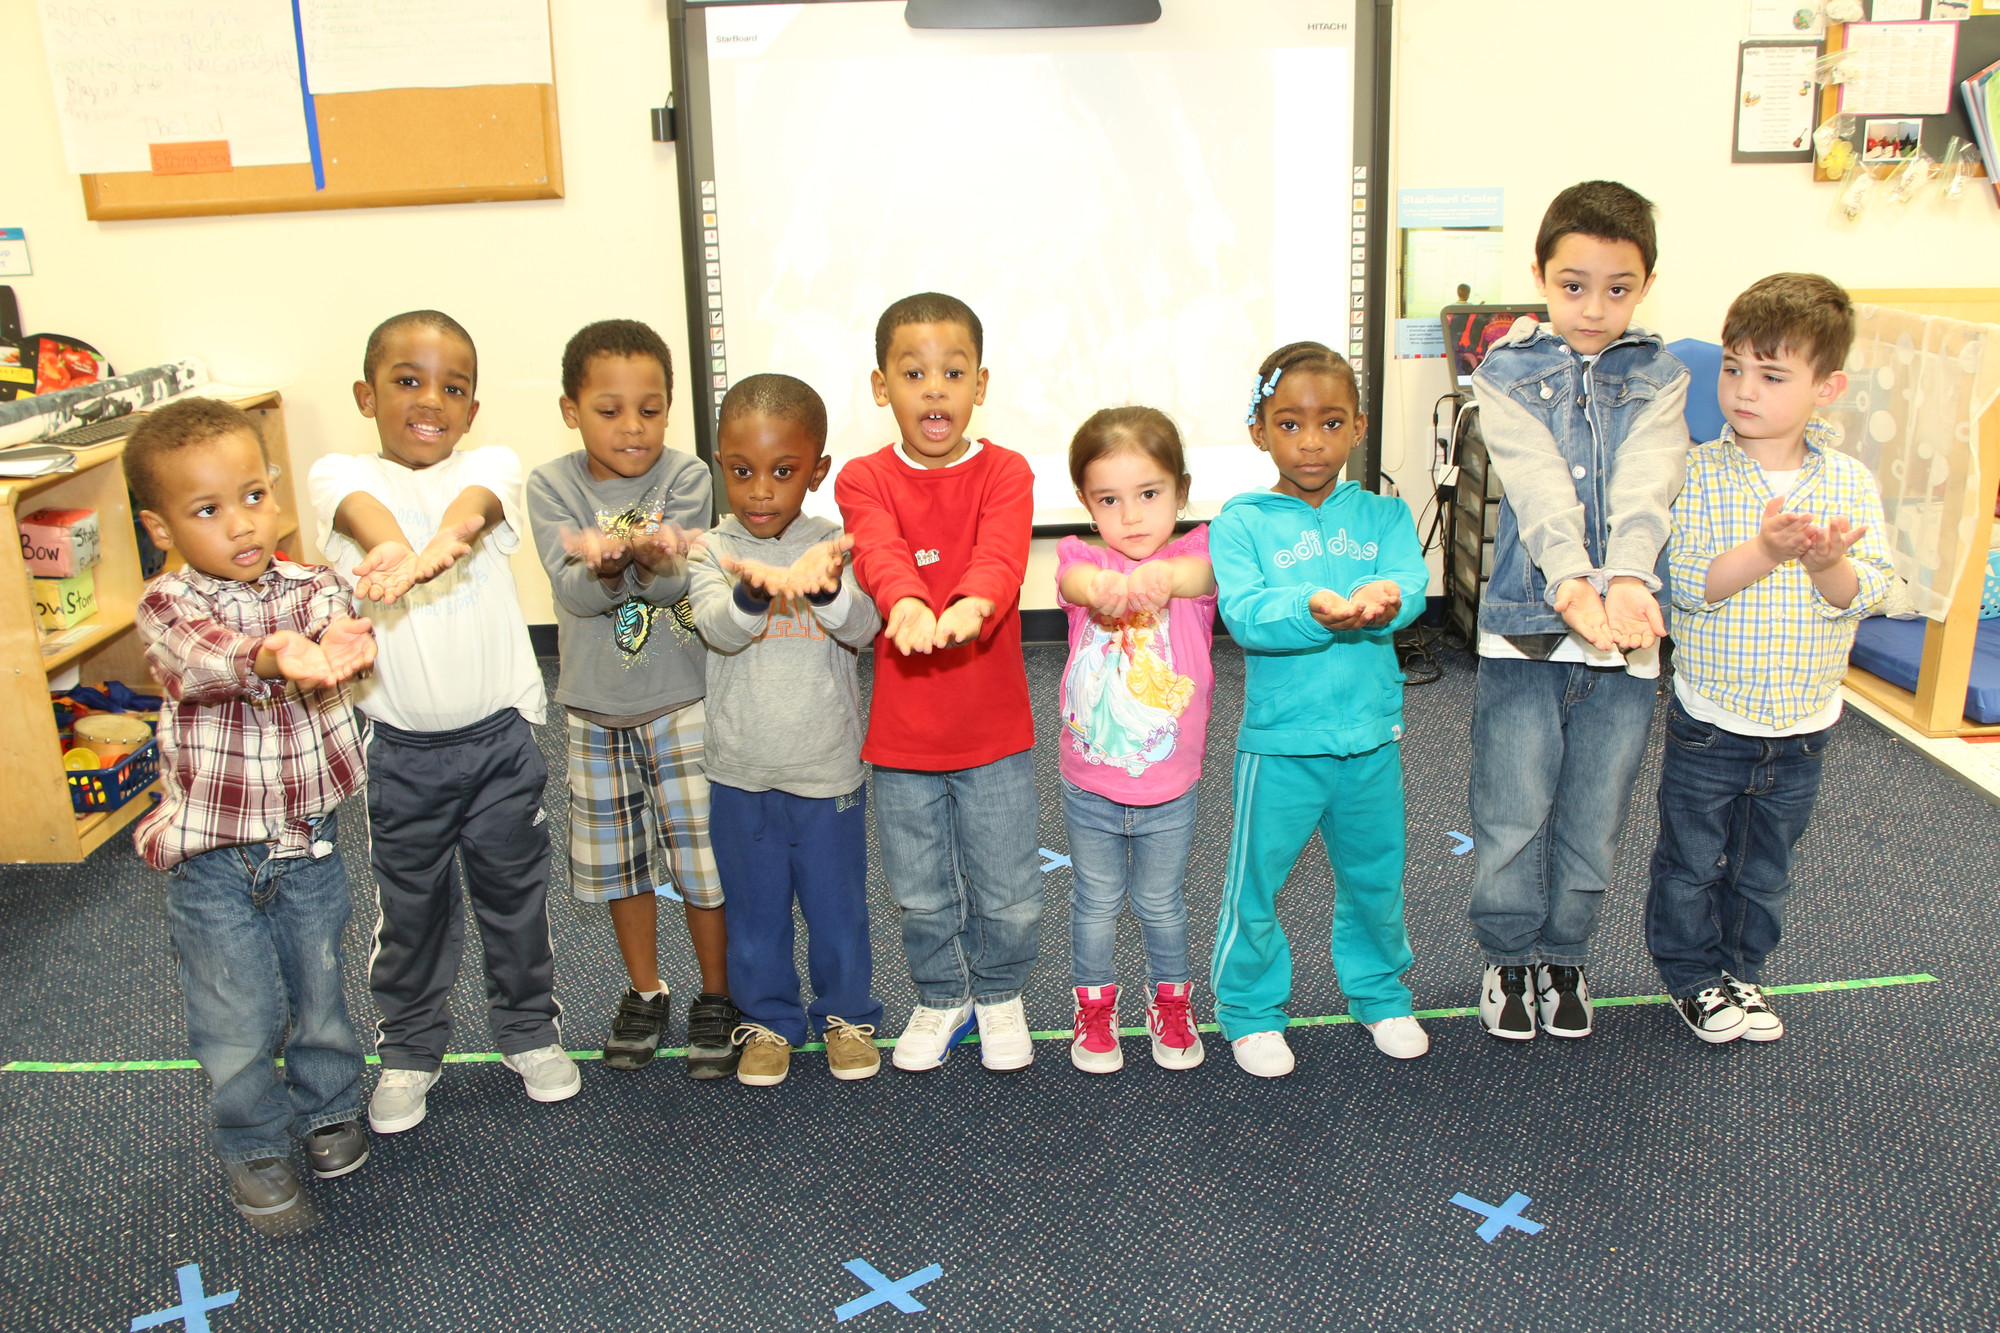 Students at Tutor Time sang and danced their hearts out. From left are Griffin Reyer, Ethan Francois, Victoria White, Julian Bishop, Johanna Gonzalez, Jaelee Gonzalez, Ezekiel Backman, Jace Owens and Jonathan Greenridge.